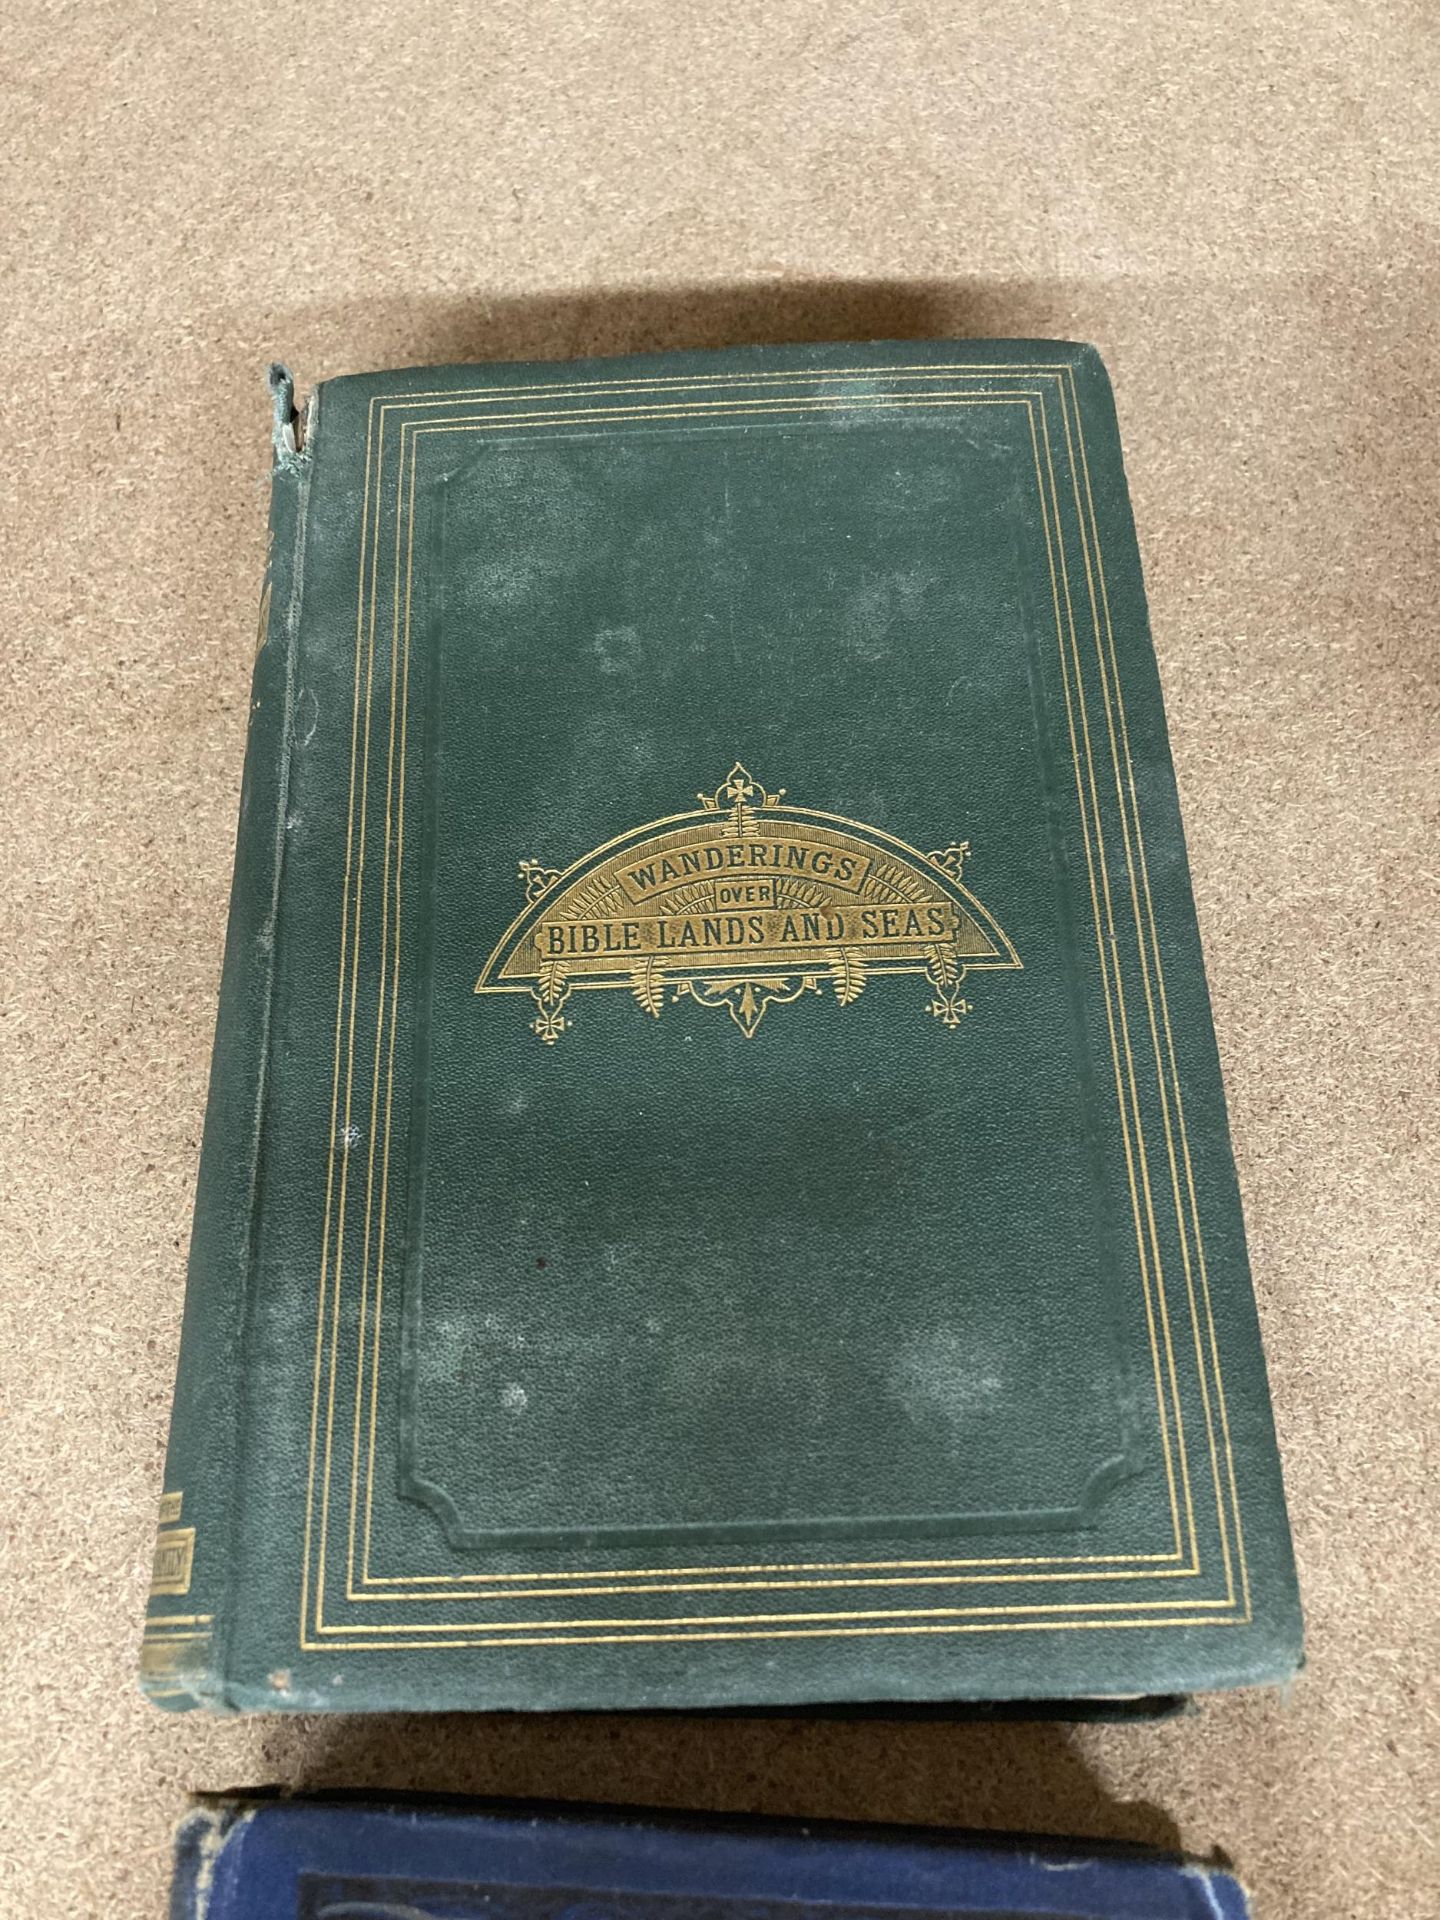 TWO ANTIQUE BOOKS, 'WANDERING OVER BIBLE LANDS AND SEA' PUBLISHED 1866 AND 'THE LOG BOOK OF A - Image 2 of 6